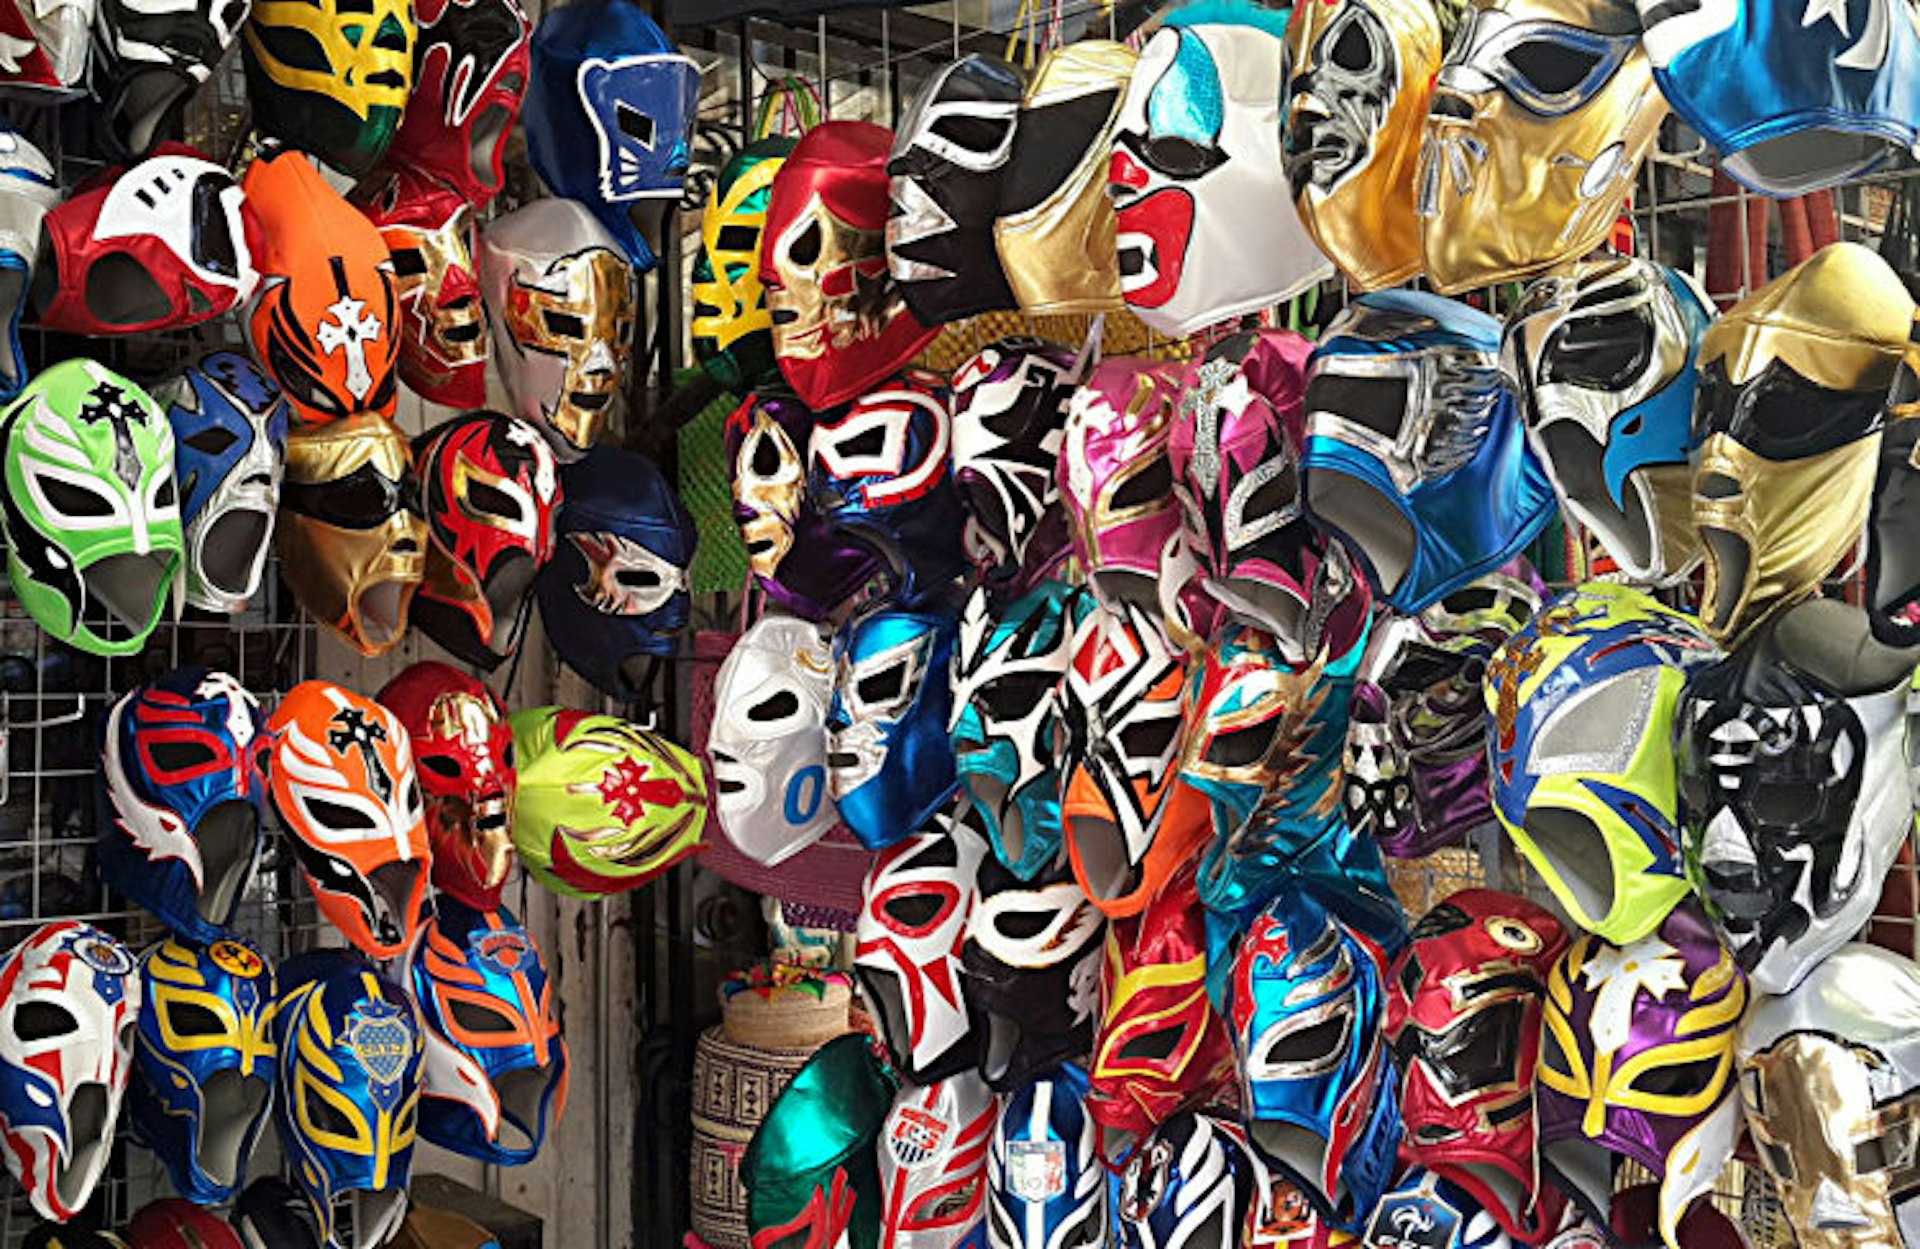 Mascaras (masks) are just one of the flamboyant elements associated with lucha libre. Image by Katja Gaskell / Lonely Planet